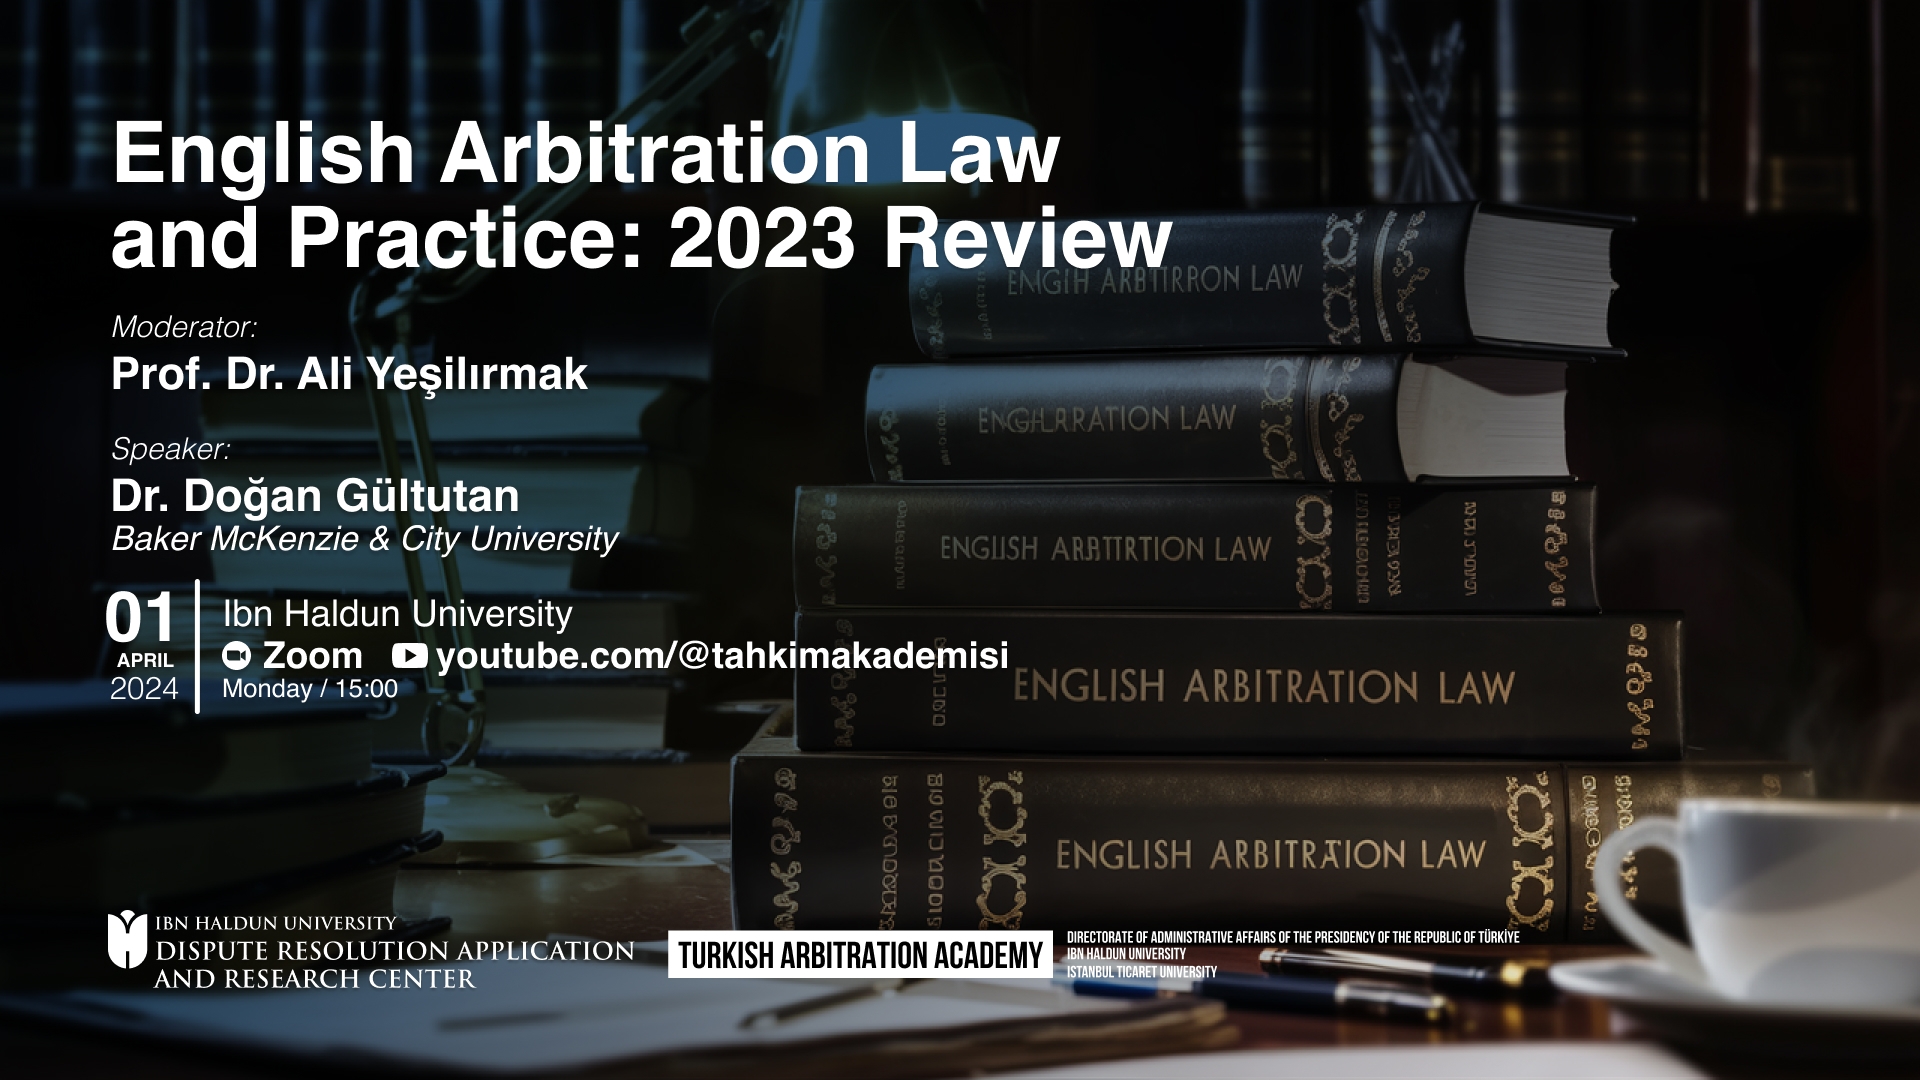 English Arbitration Law and Practice: 2023 Review